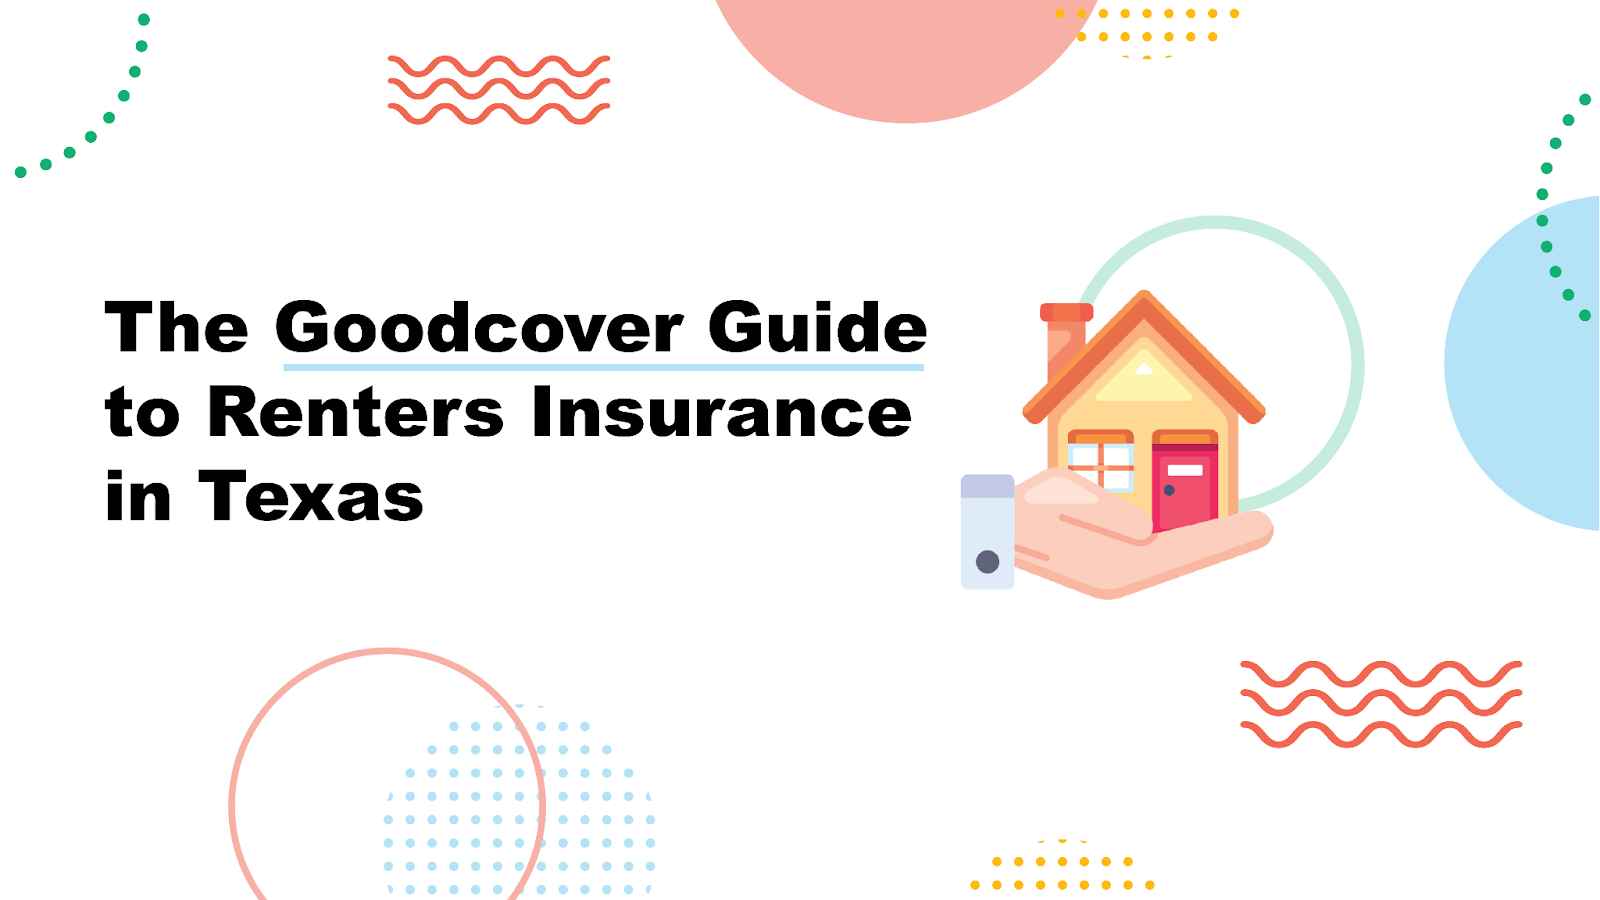 What You Need To Know About Renters Insurance in Texas